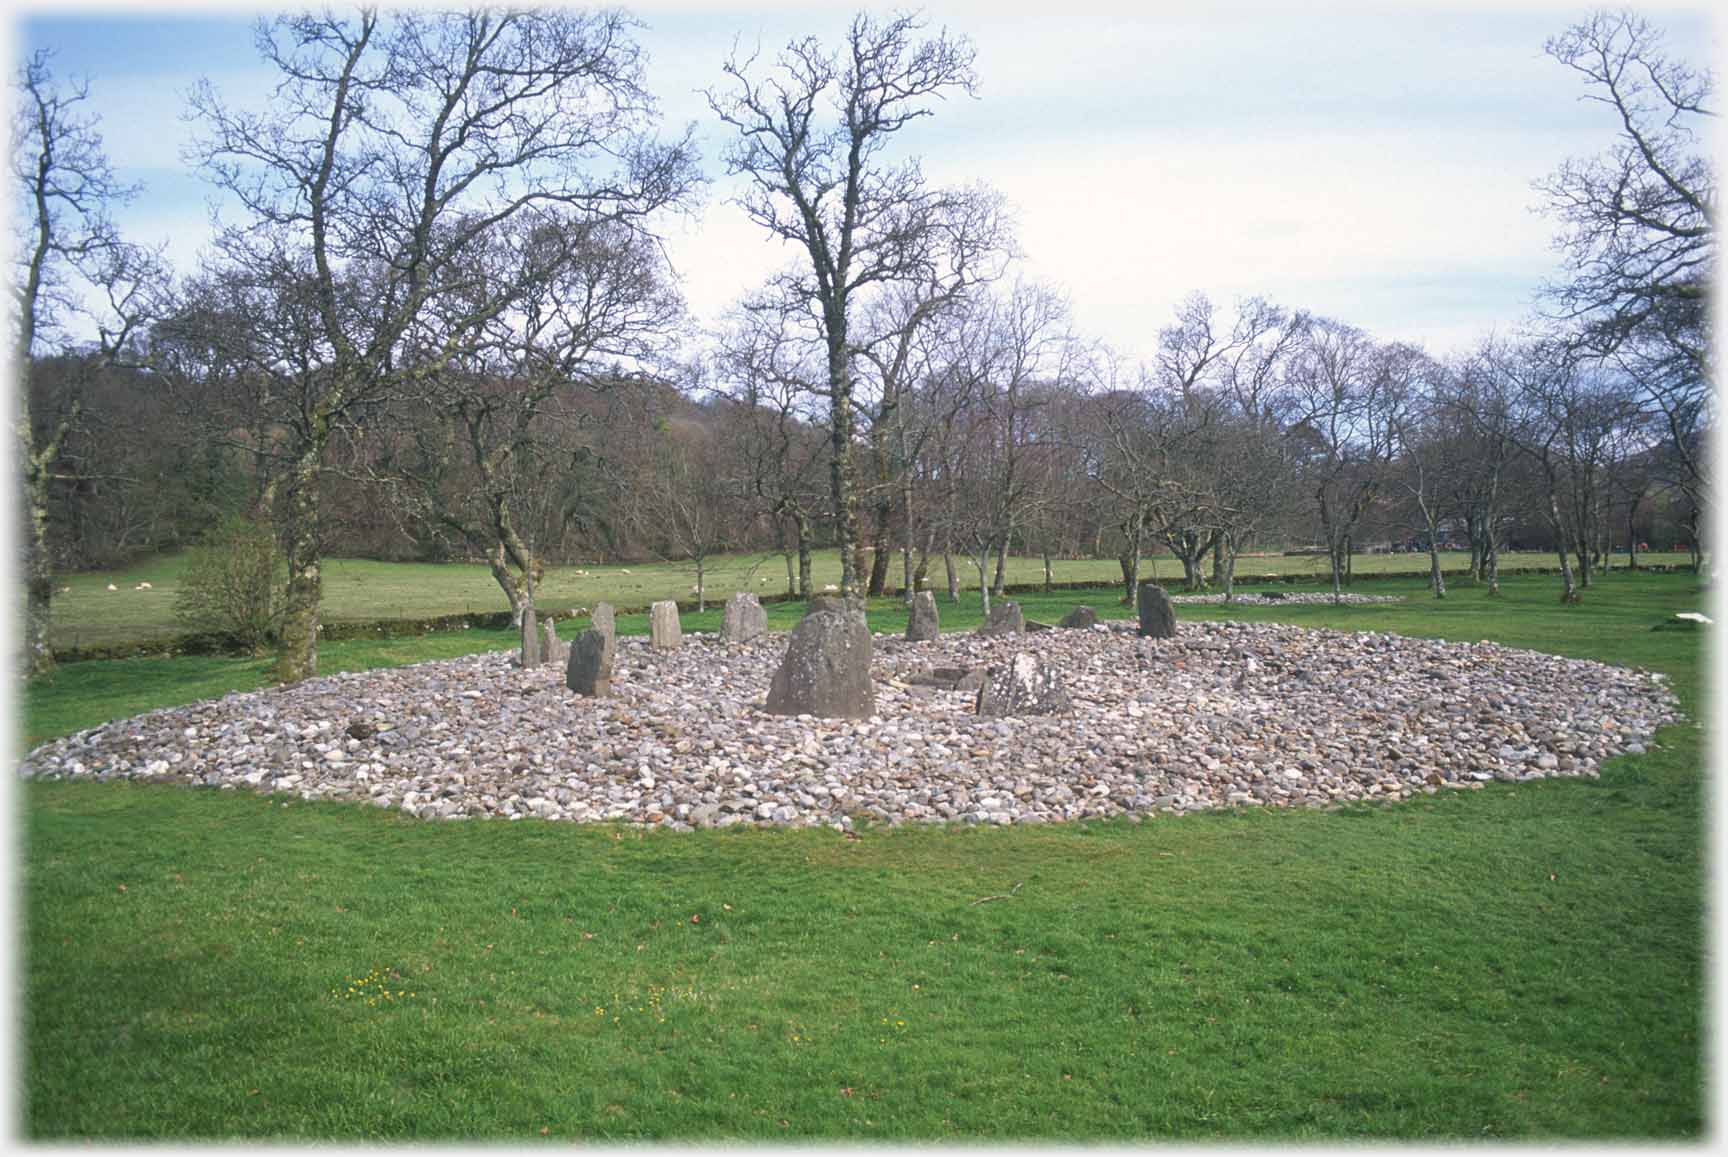 Standing stones forming a circle in an area of small stones.